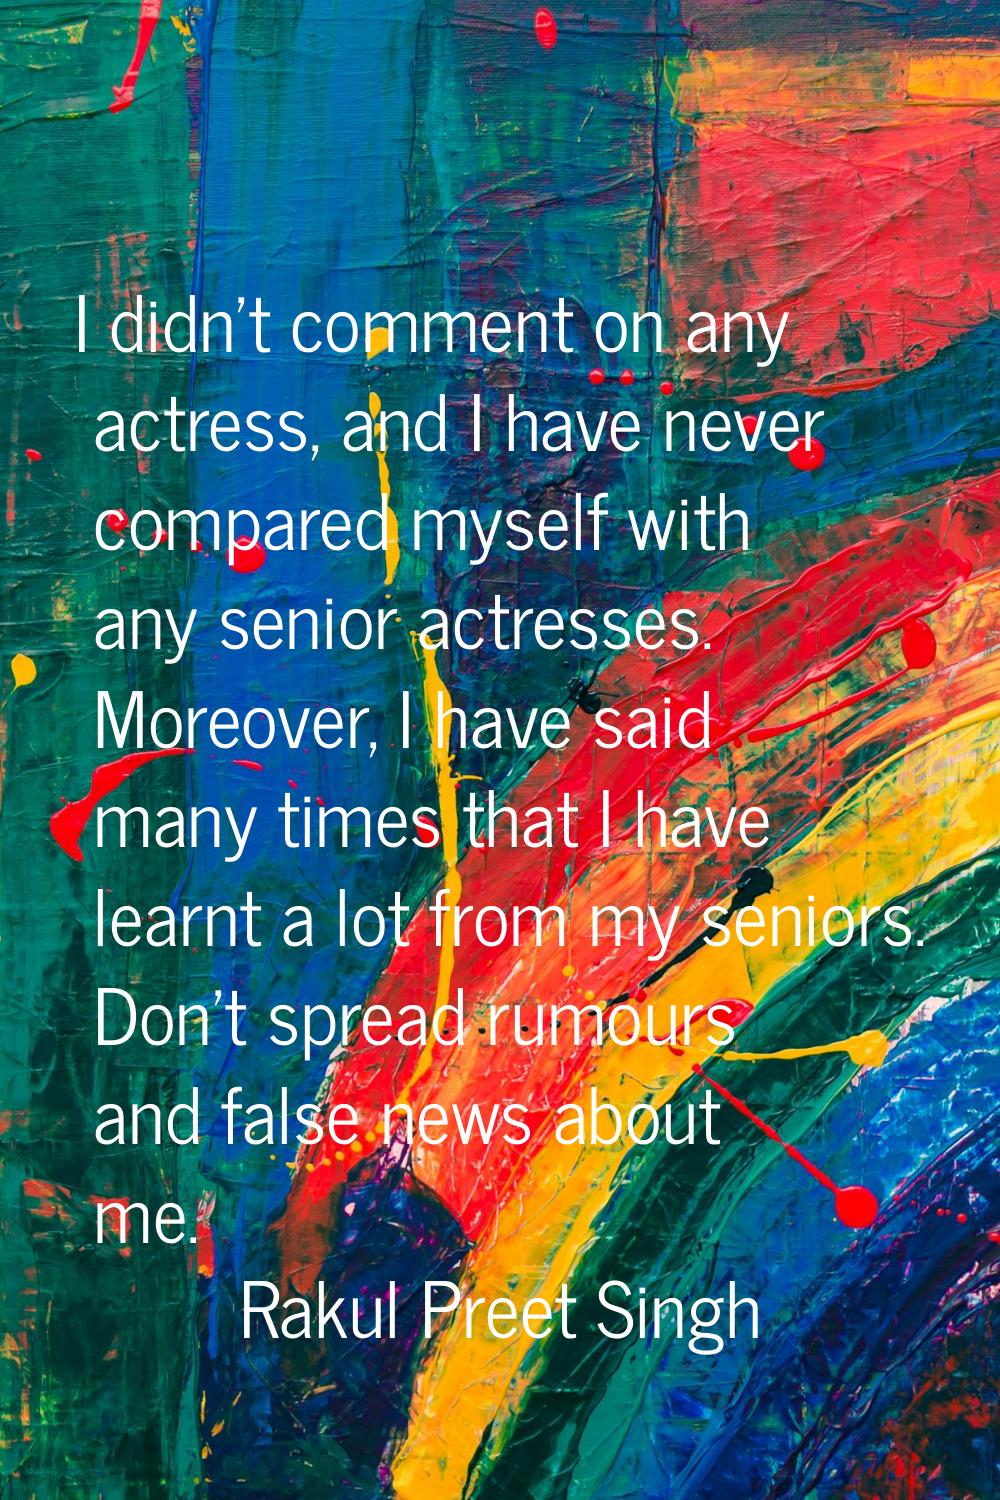 I didn't comment on any actress, and I have never compared myself with any senior actresses. Moreov